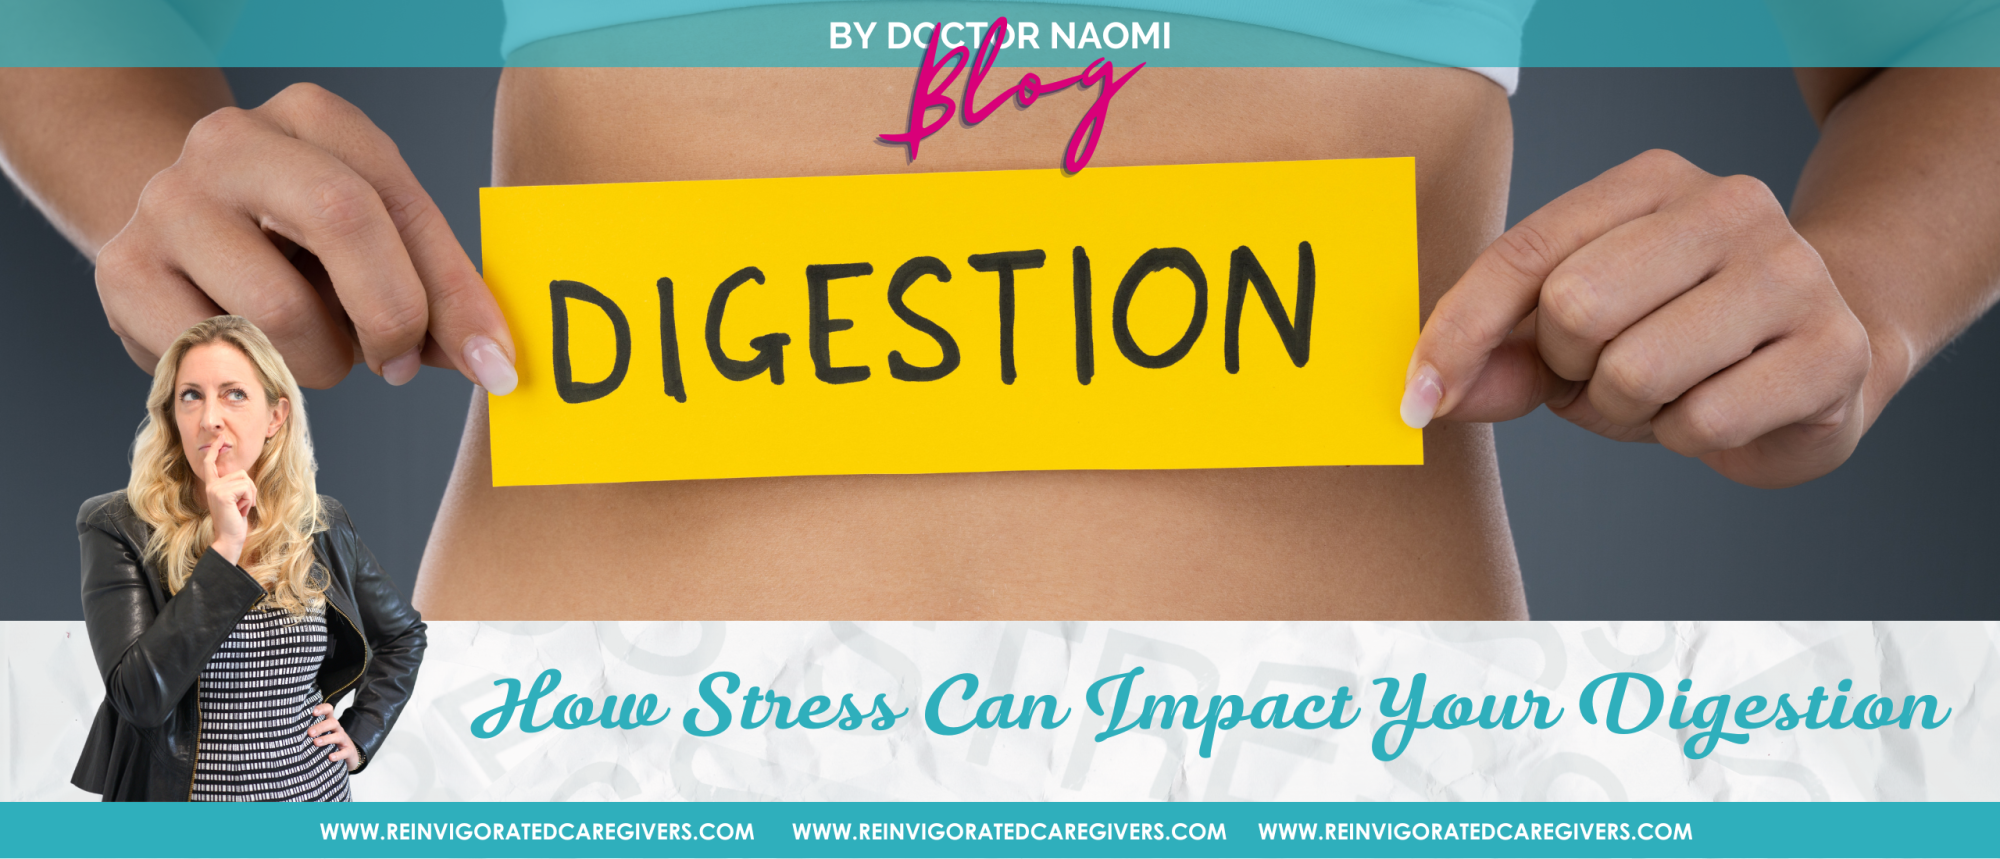 Blog how stress can impact your digestion